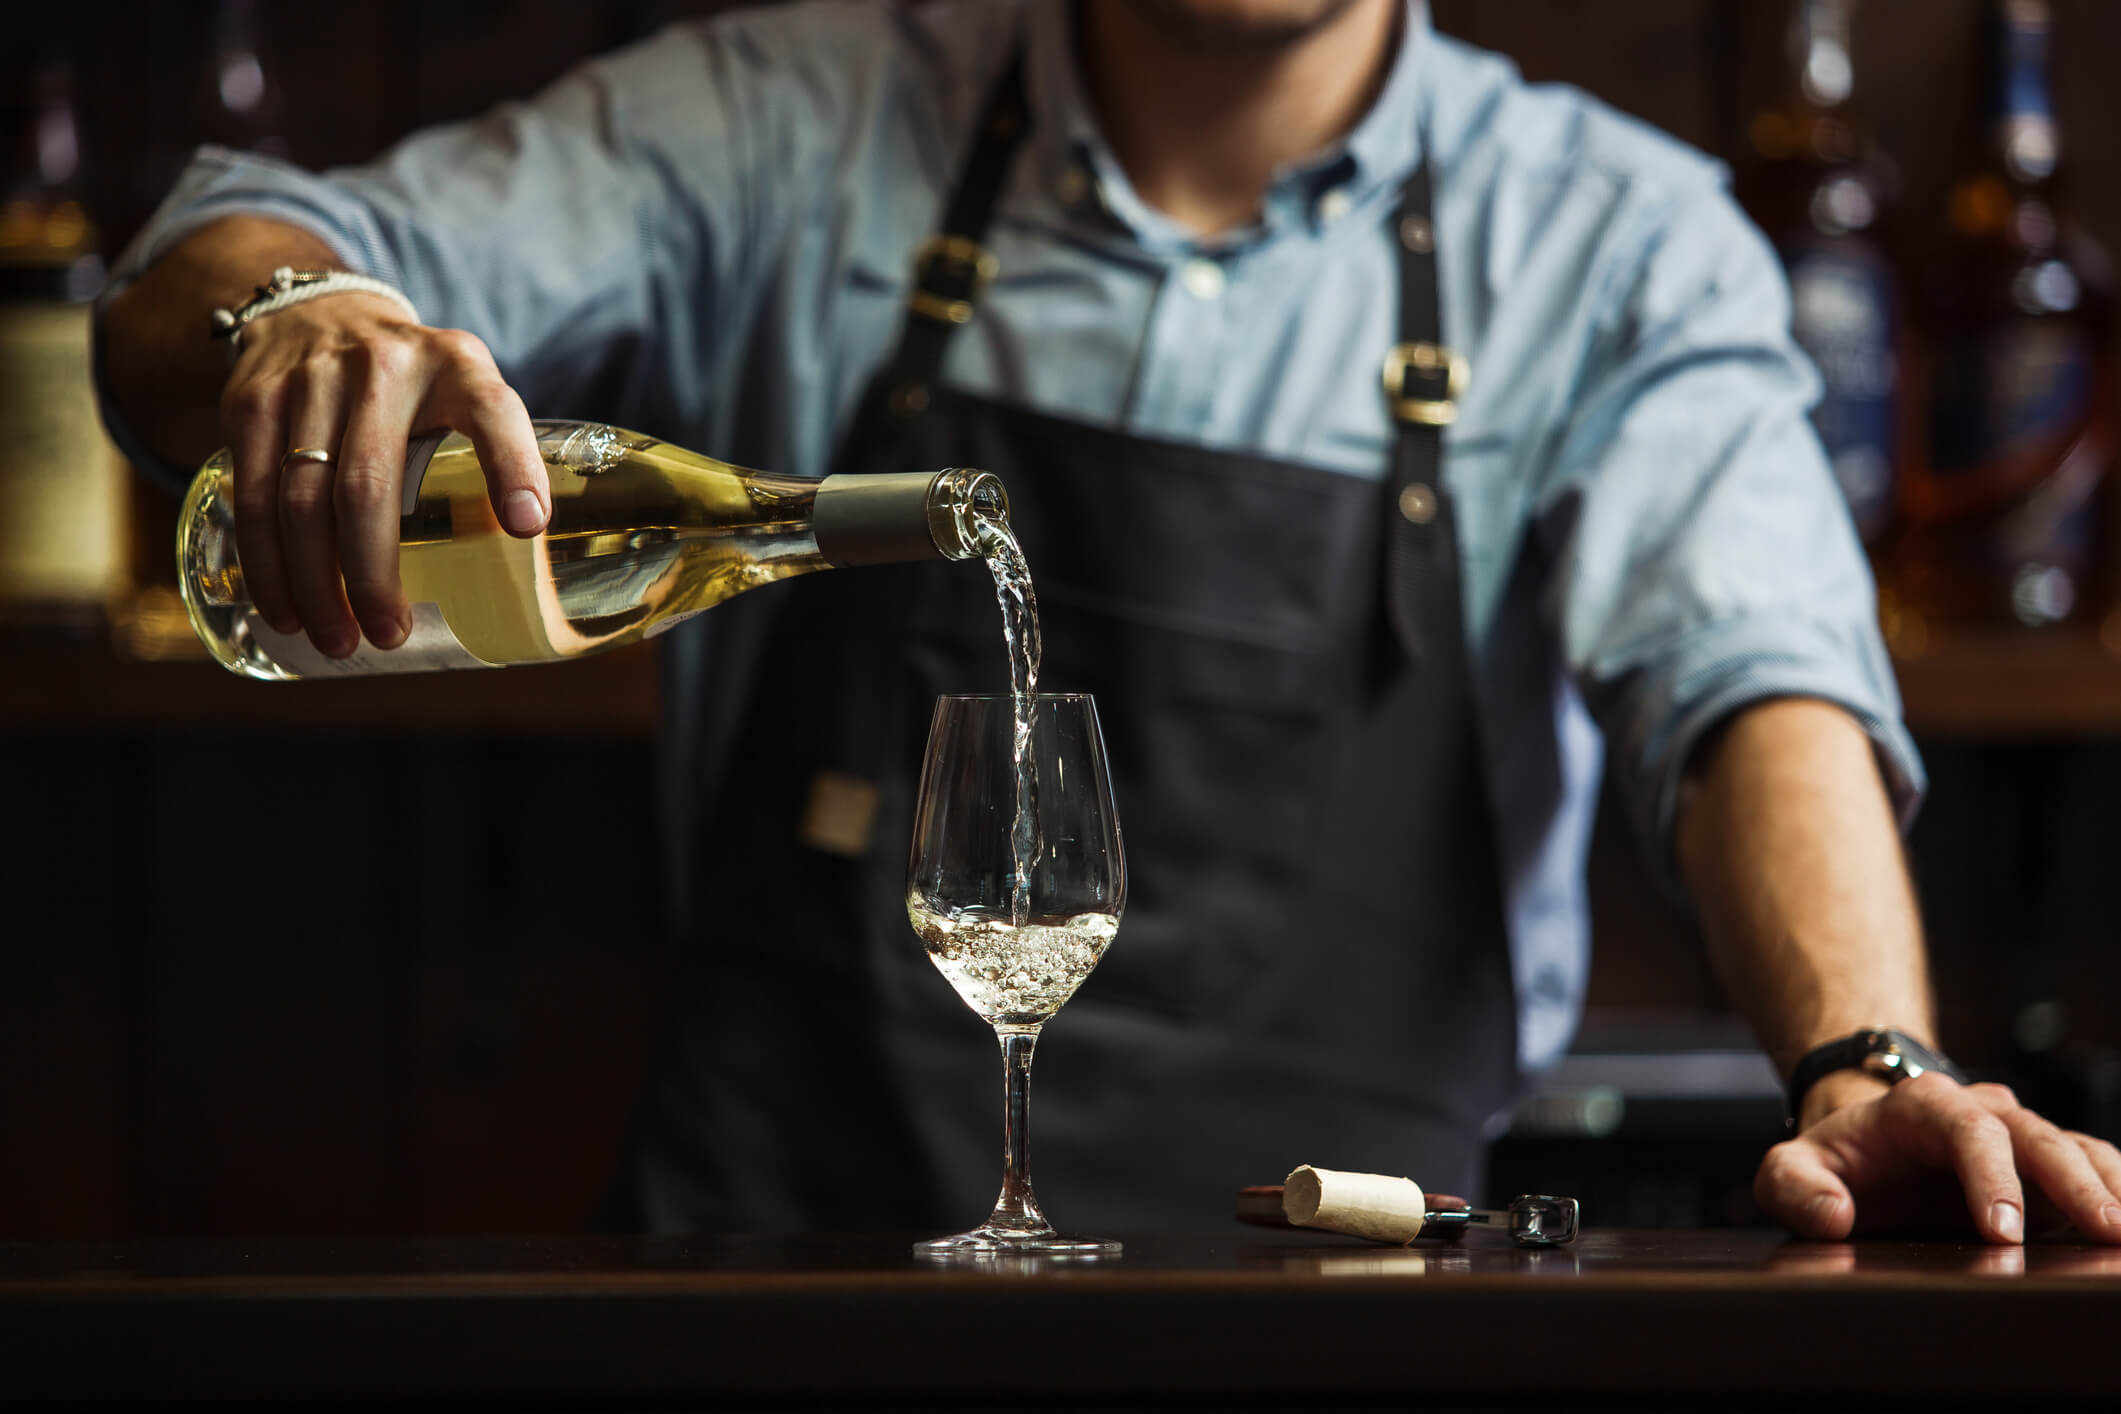 Bartender pouring wine